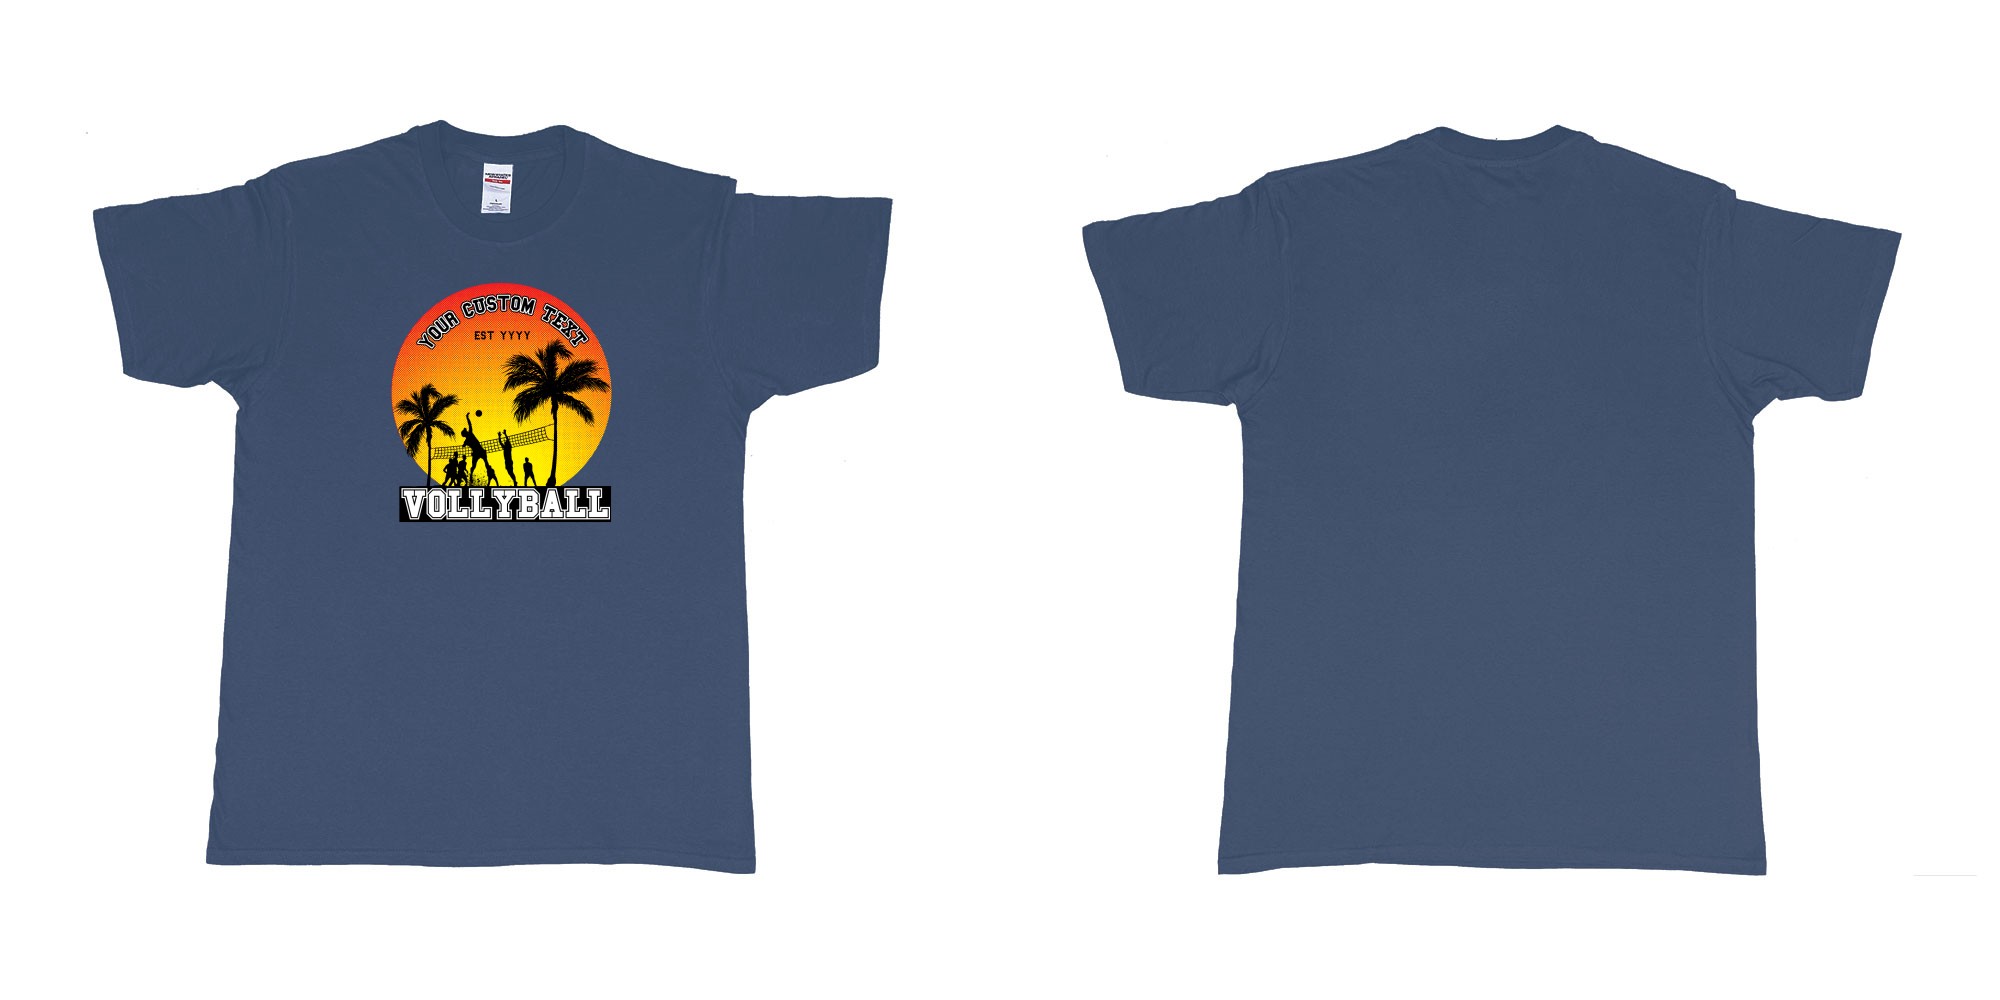 Custom tshirt design sunset volleyball t shirt with a sunset view and your custom print text and year in fabric color navy choice your own text made in Bali by The Pirate Way